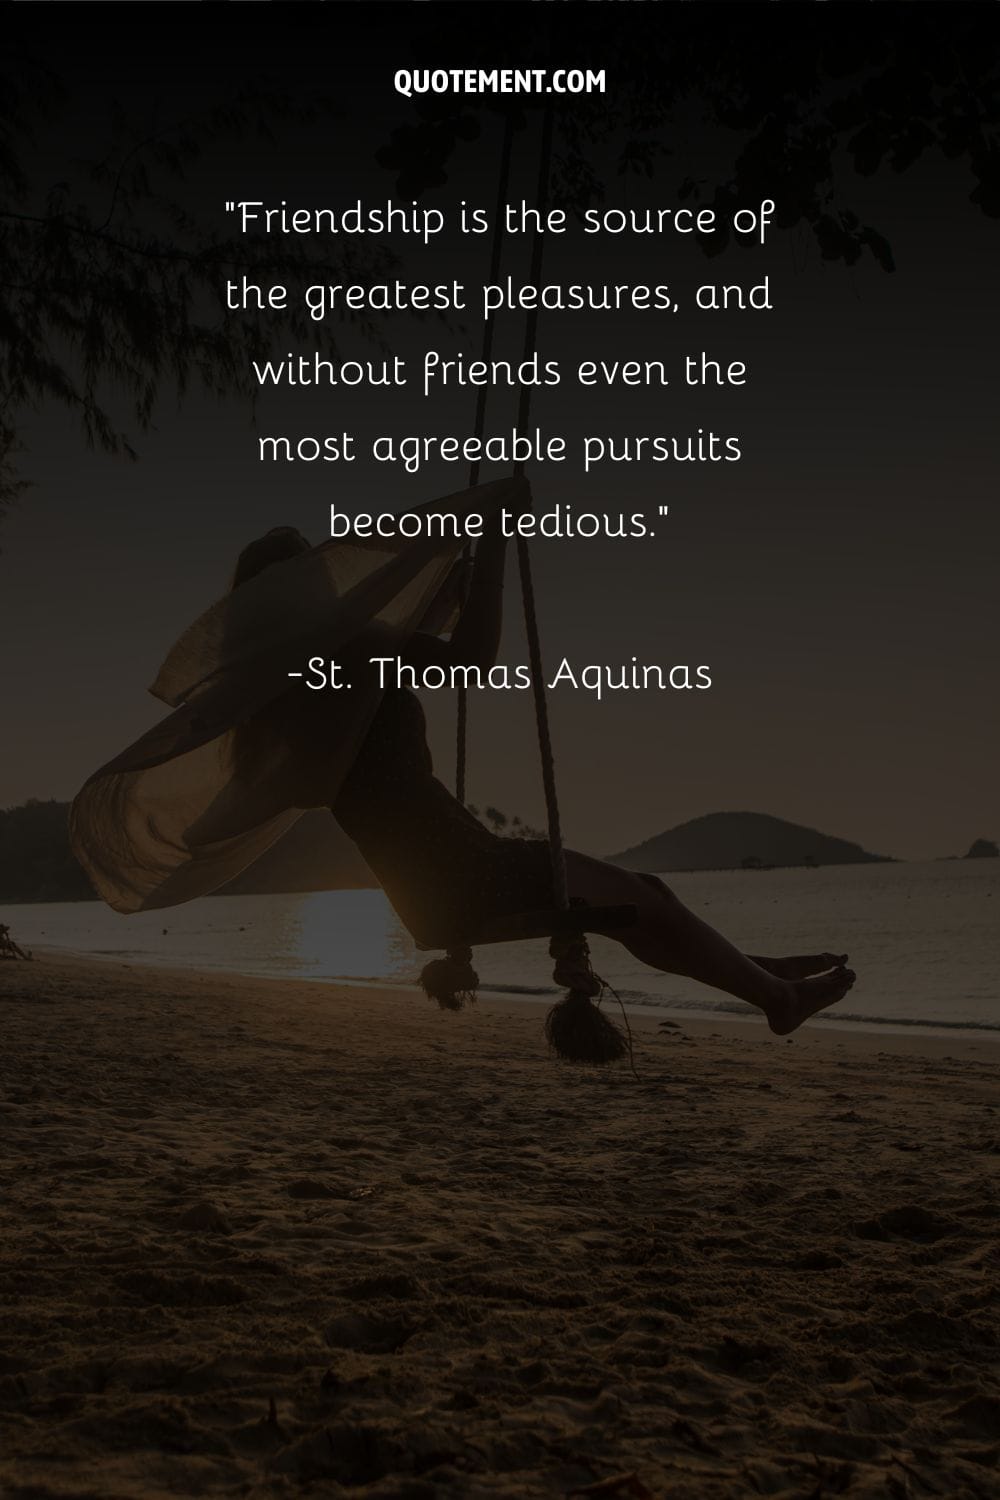 Friendship is the source of the greatest pleasures, and without friends even the most agreeable pursuits become tedious